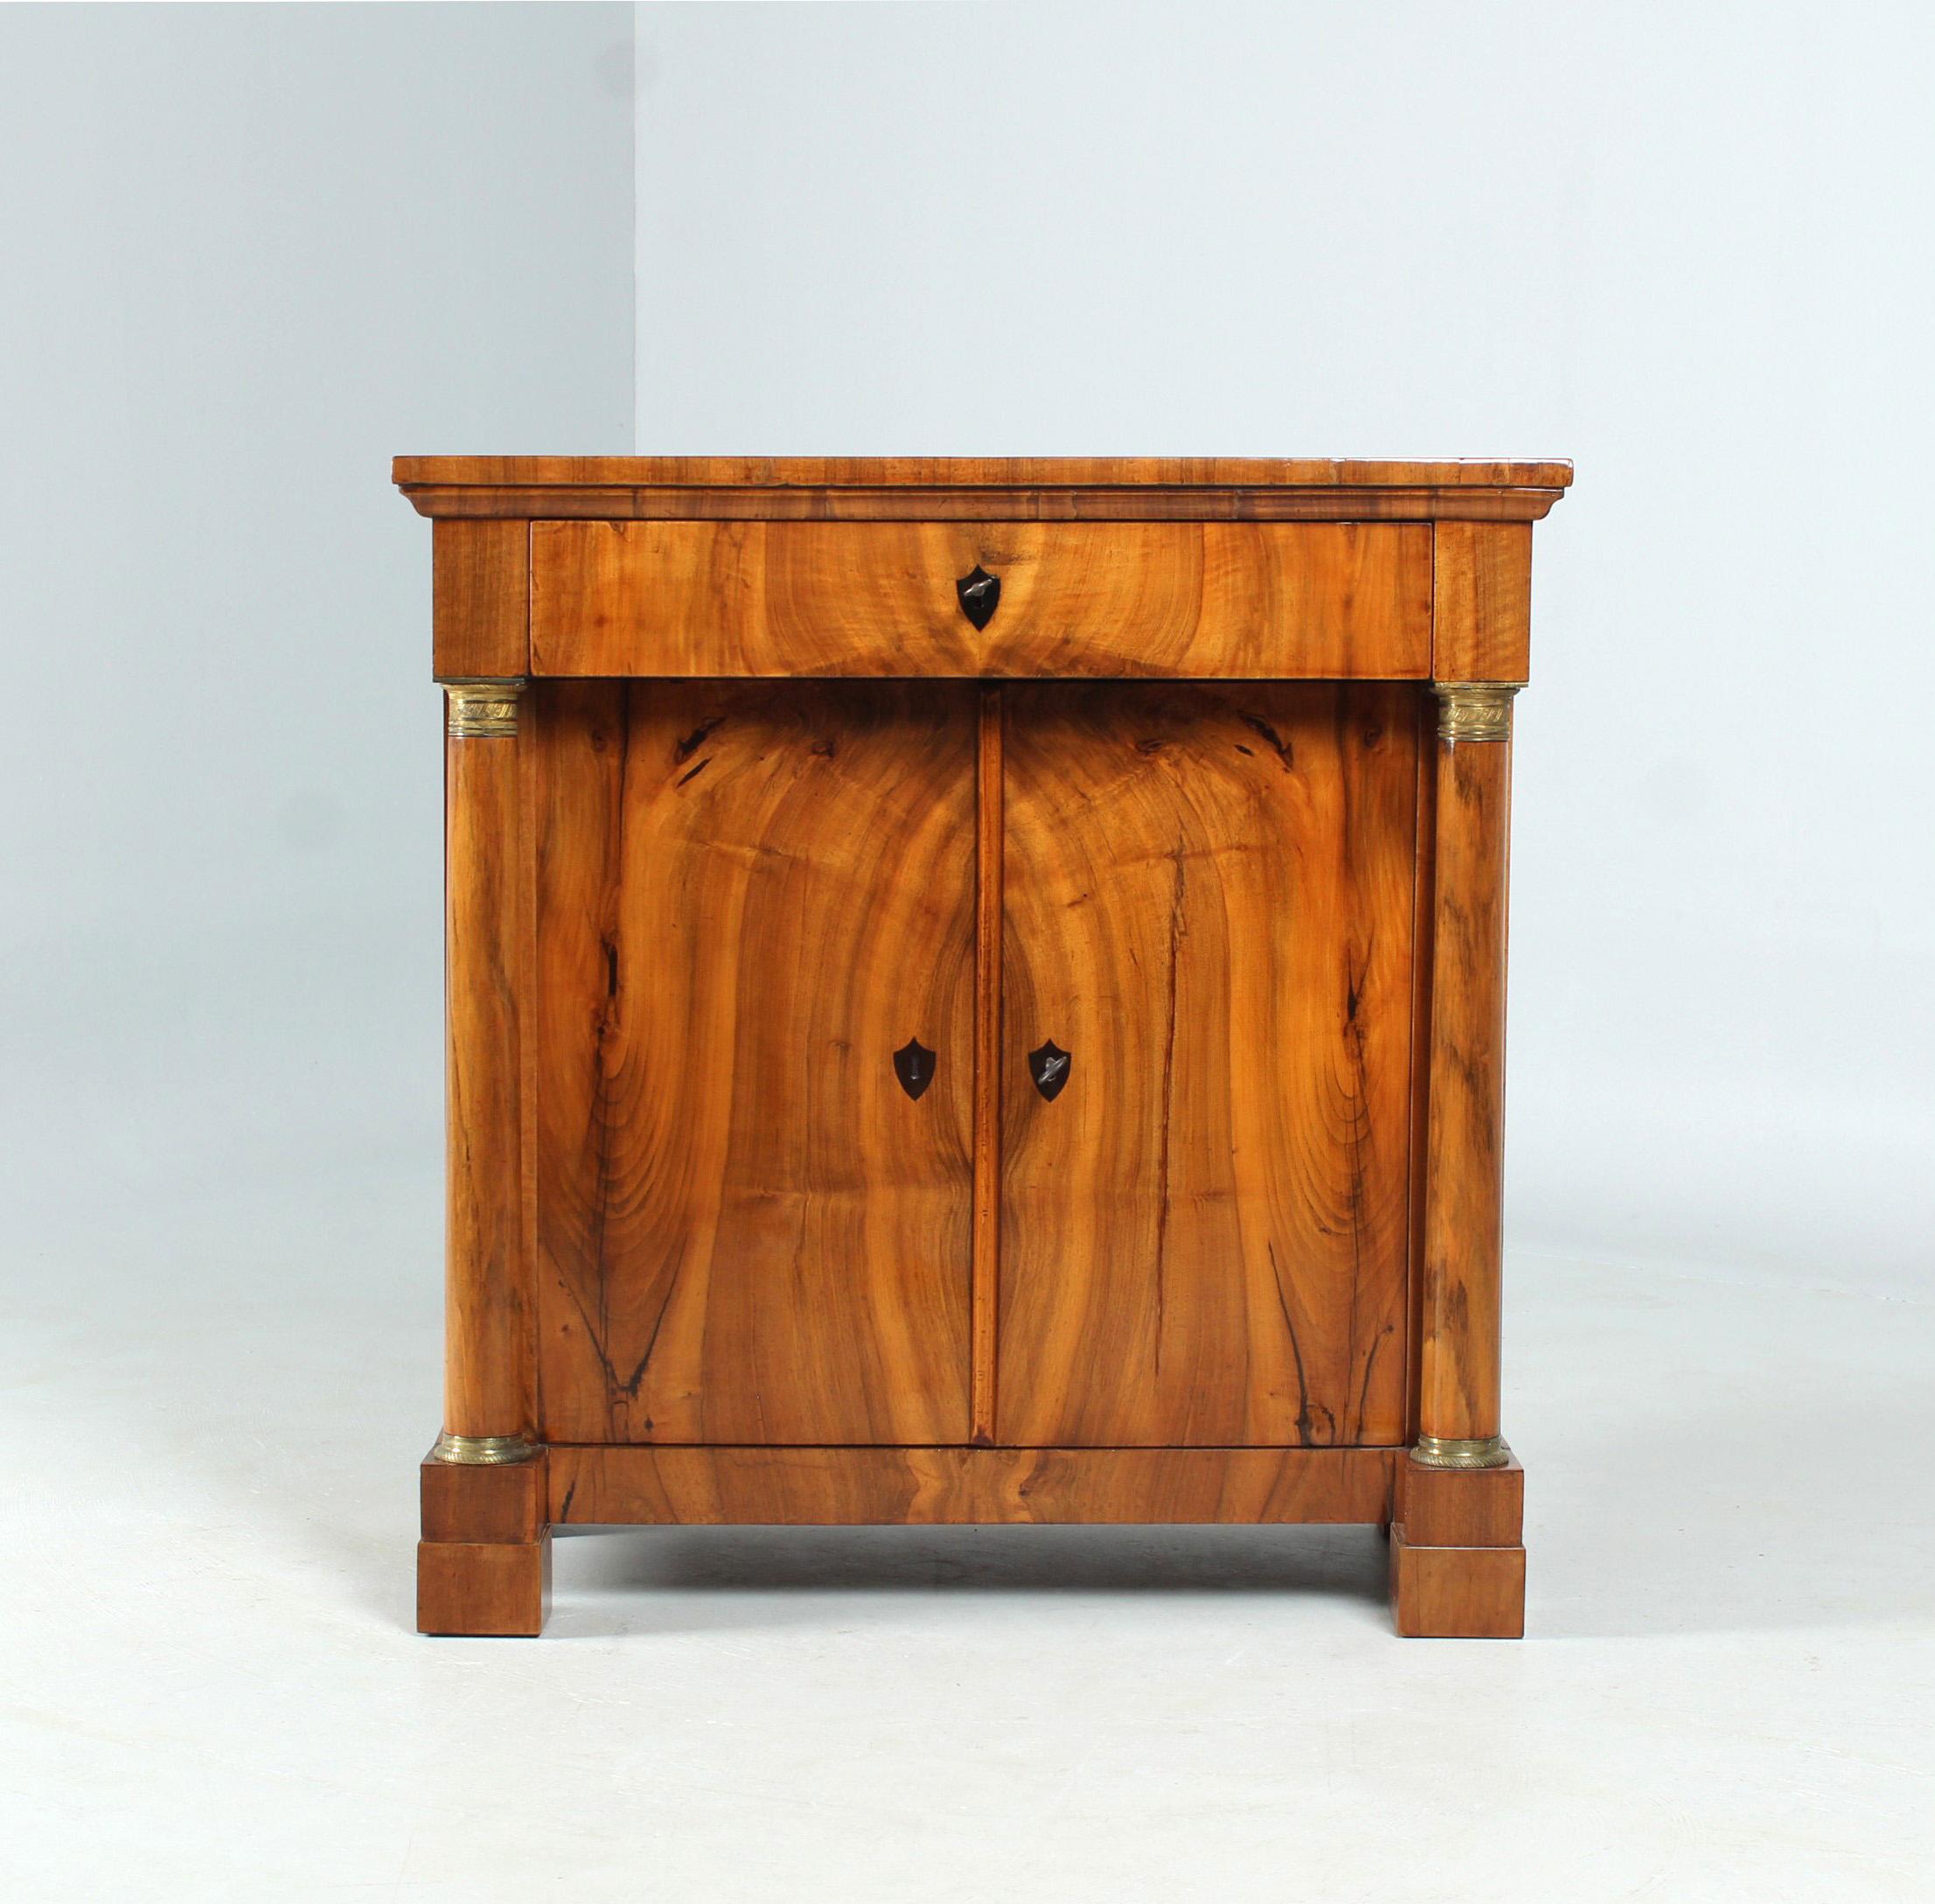 Biedermeier Sideboard

West Germany
Walnut
Biedermeier around 1825

Dimensions: H x W x D: 89 x 87 x 45 cm

Description:
Piece of furniture standing on block feet with two doors flanked by solid columns below and a head drawer above.
The beautiful